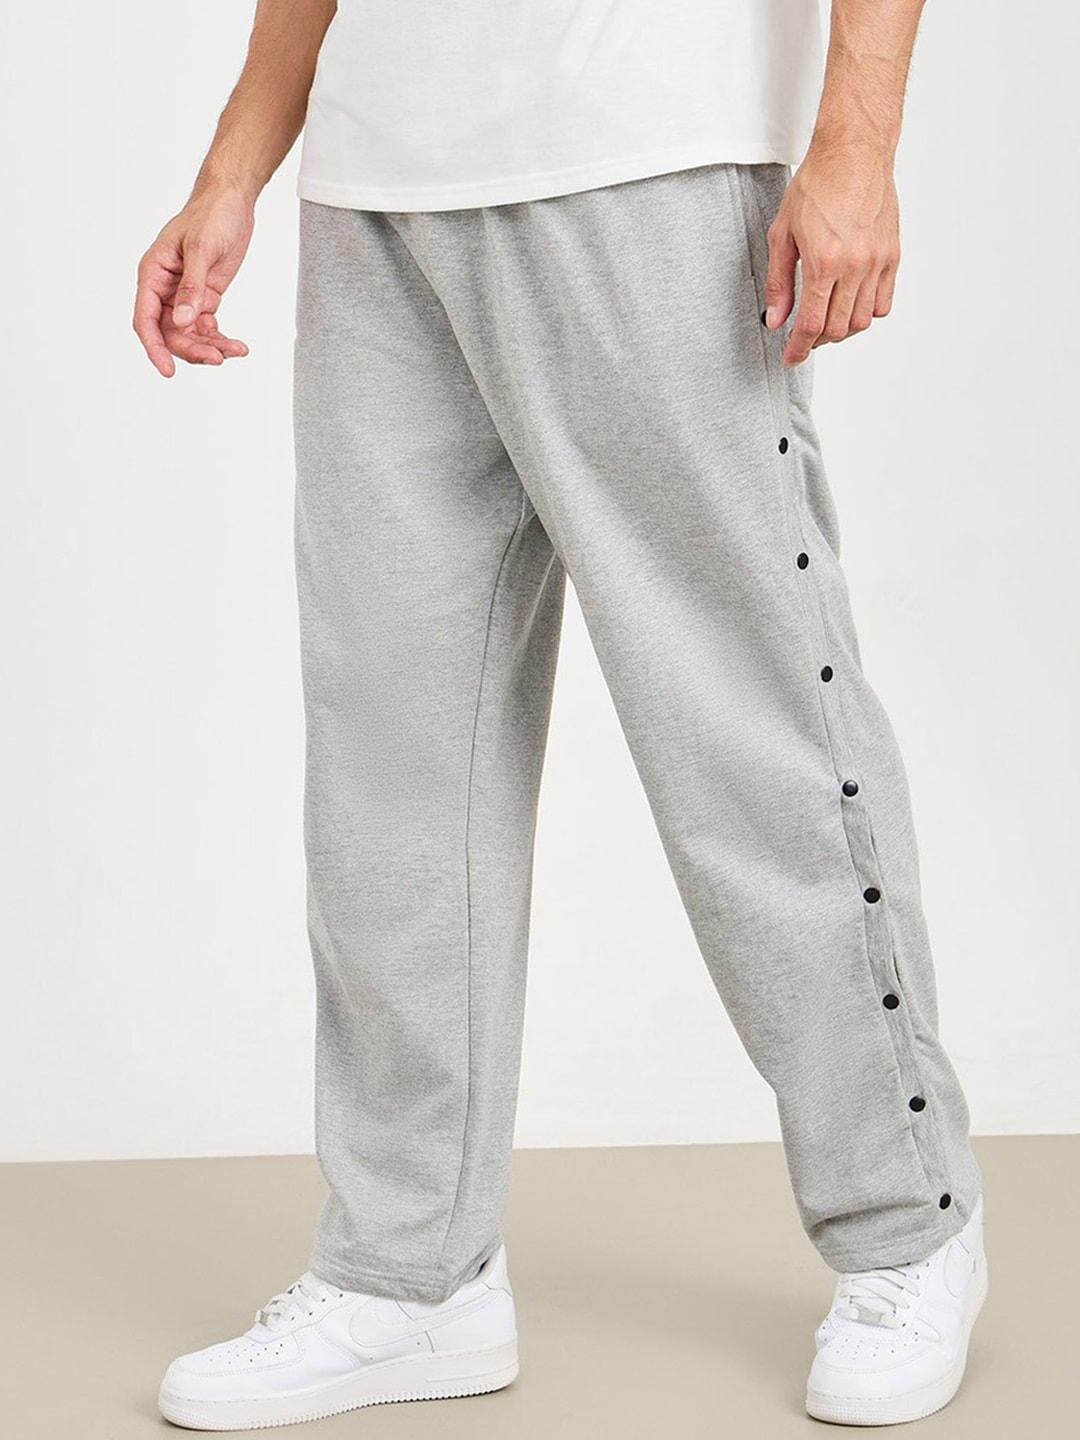 styli-men-relaxed-fit-mid-rise-cotton-track-pants